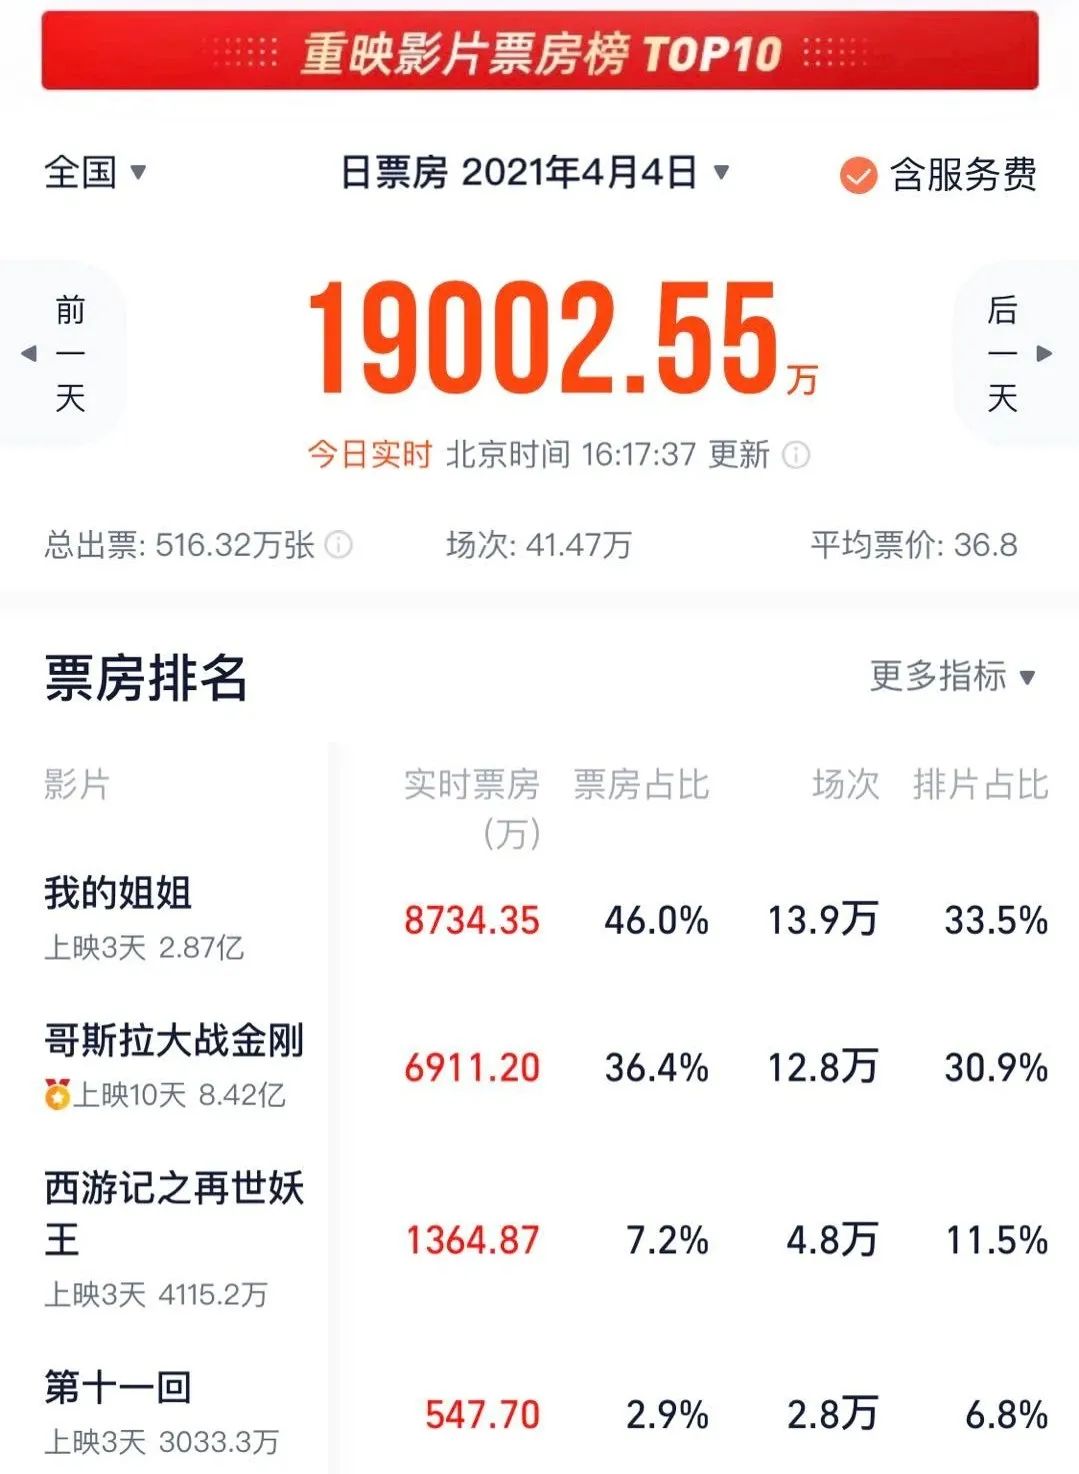 Absorb gold nearly 300 million! Guaze mask cries face film, " my elder sister " break 12 records, wang Yuan, Hu Ge, Yang Zi hits Call, rear this A company ever in detain " hello, li Huanying "